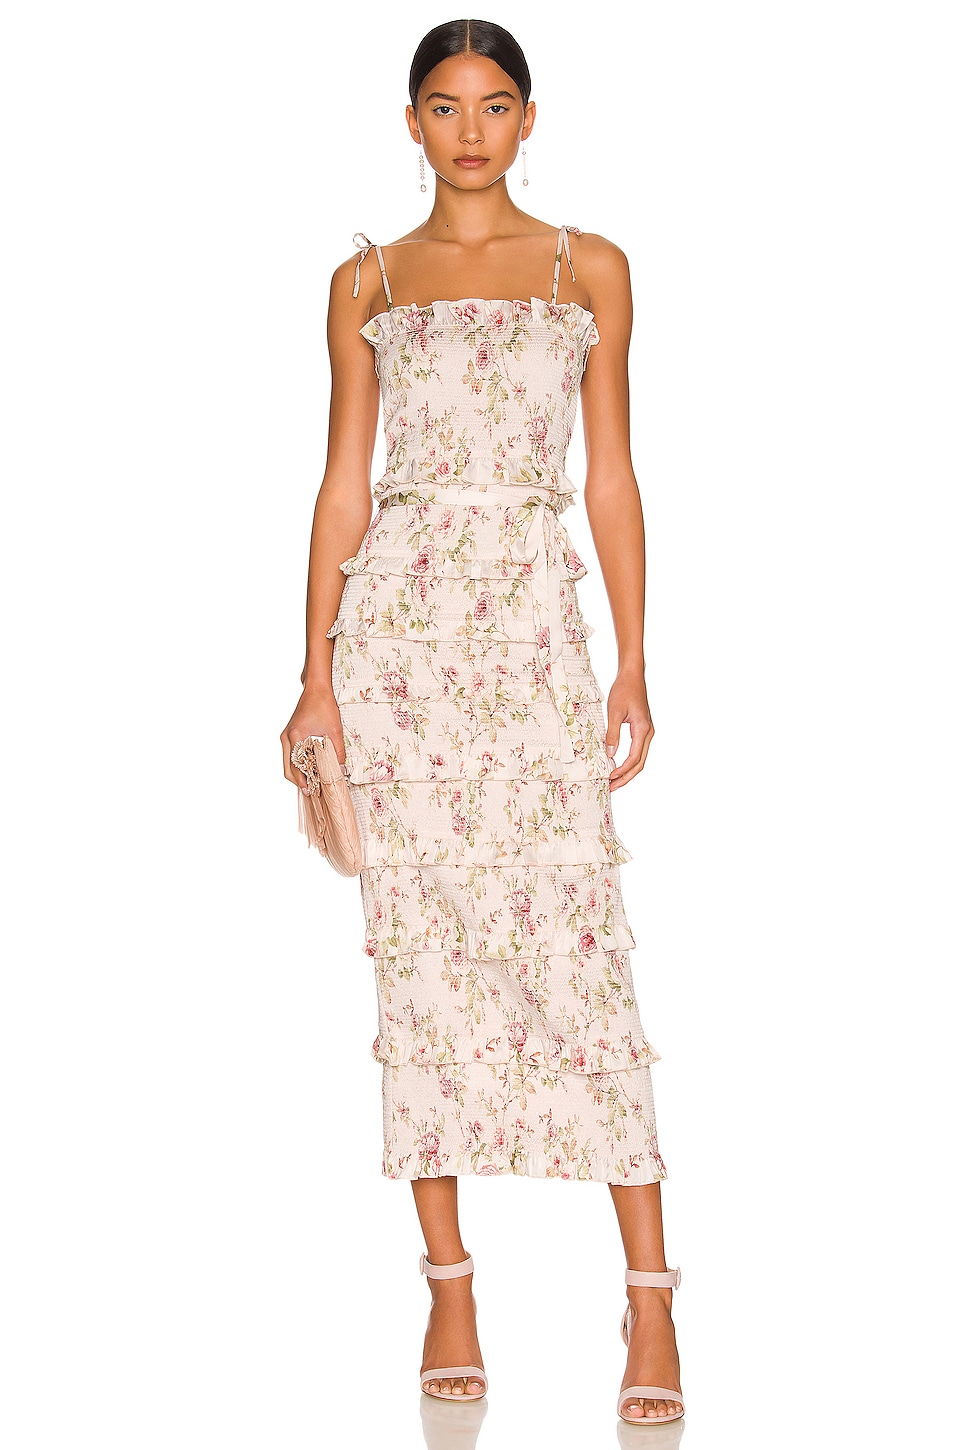 V. Chapman Lily Dress in Pink Rose Print